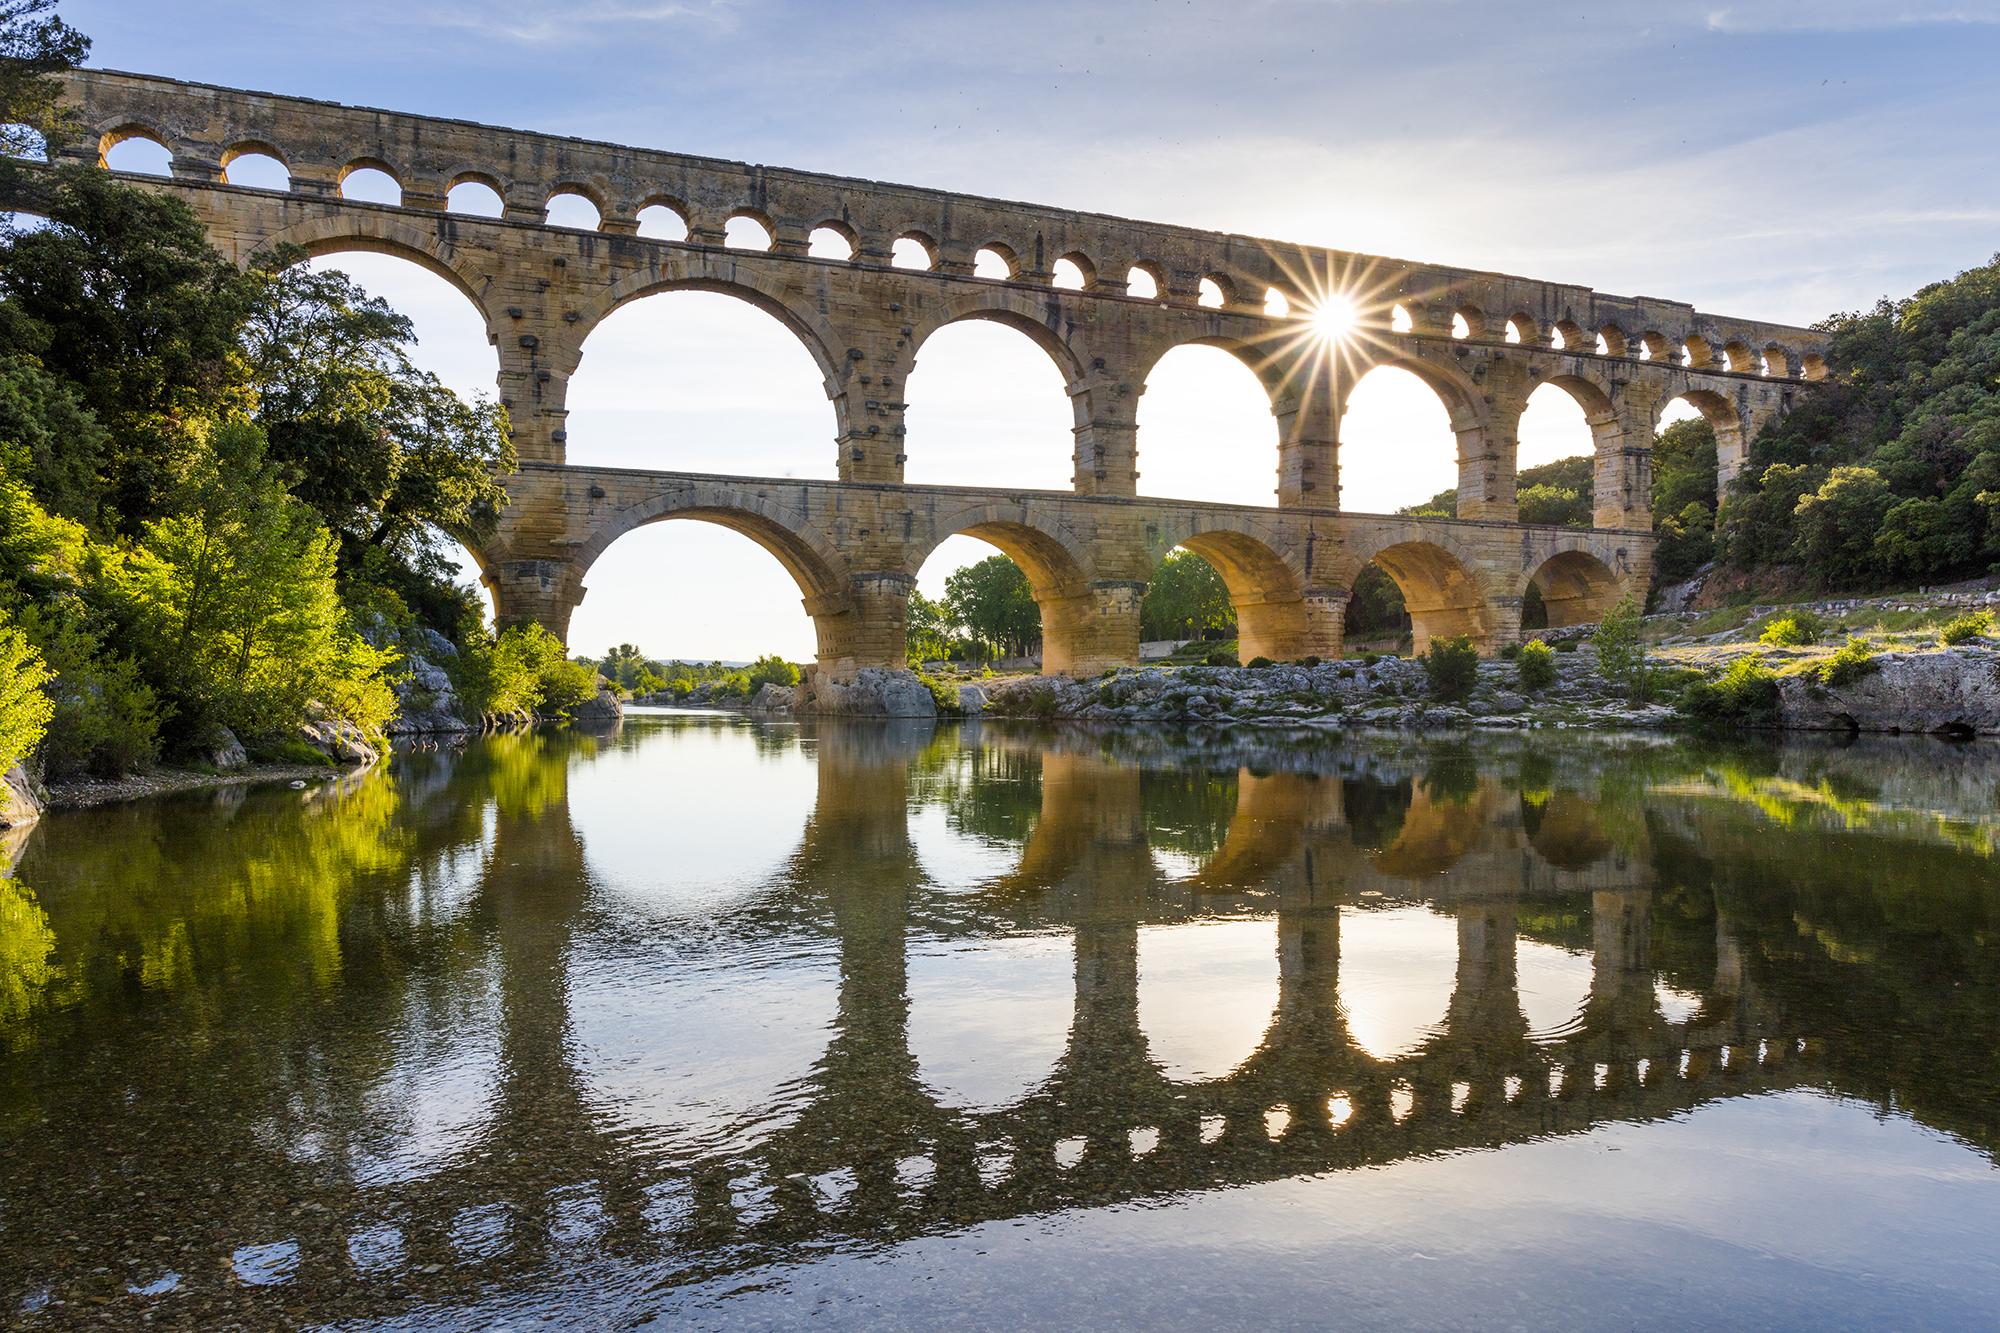 Photographic opportunities abound with this ancient masterpiece and especially when the light is right and the bridge is perfectly reflected in the water. - – © Aurelio Rodriguez